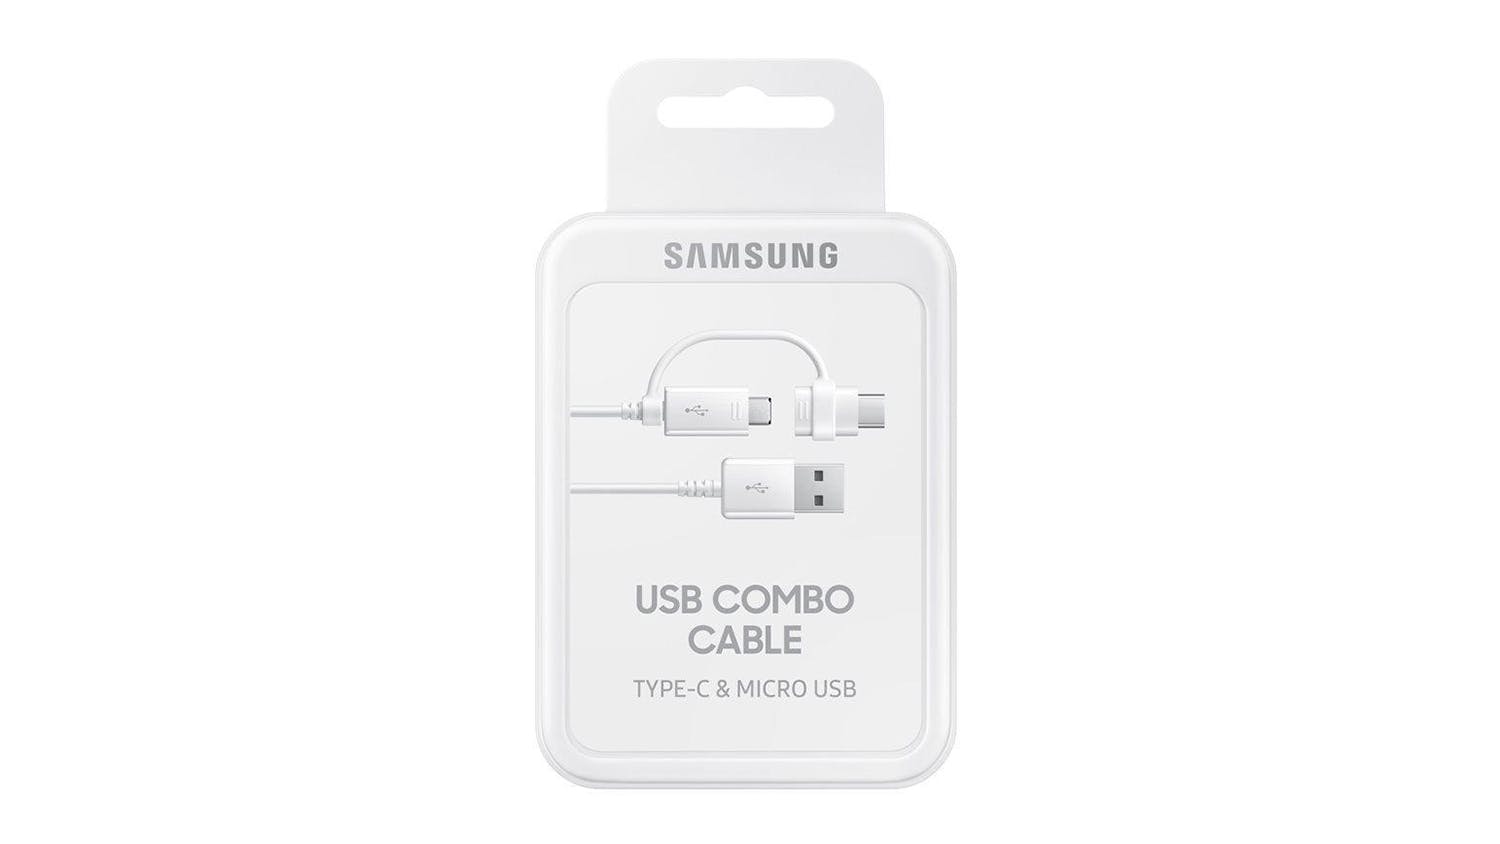 Samsung Micro USB / Type C Data Cable Combo